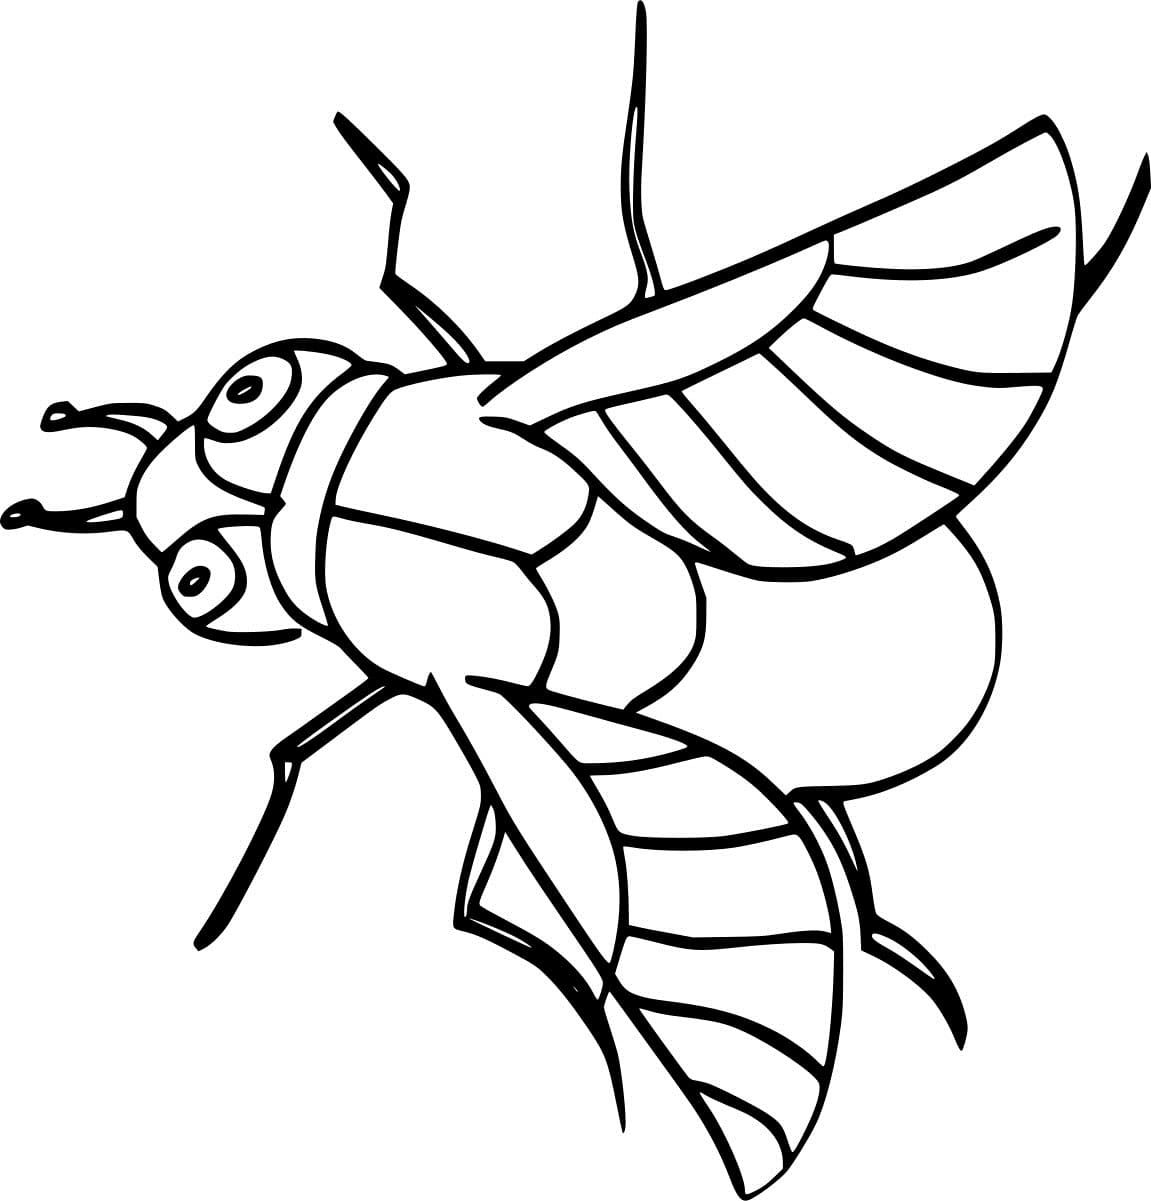 Easy Simple Fly Image